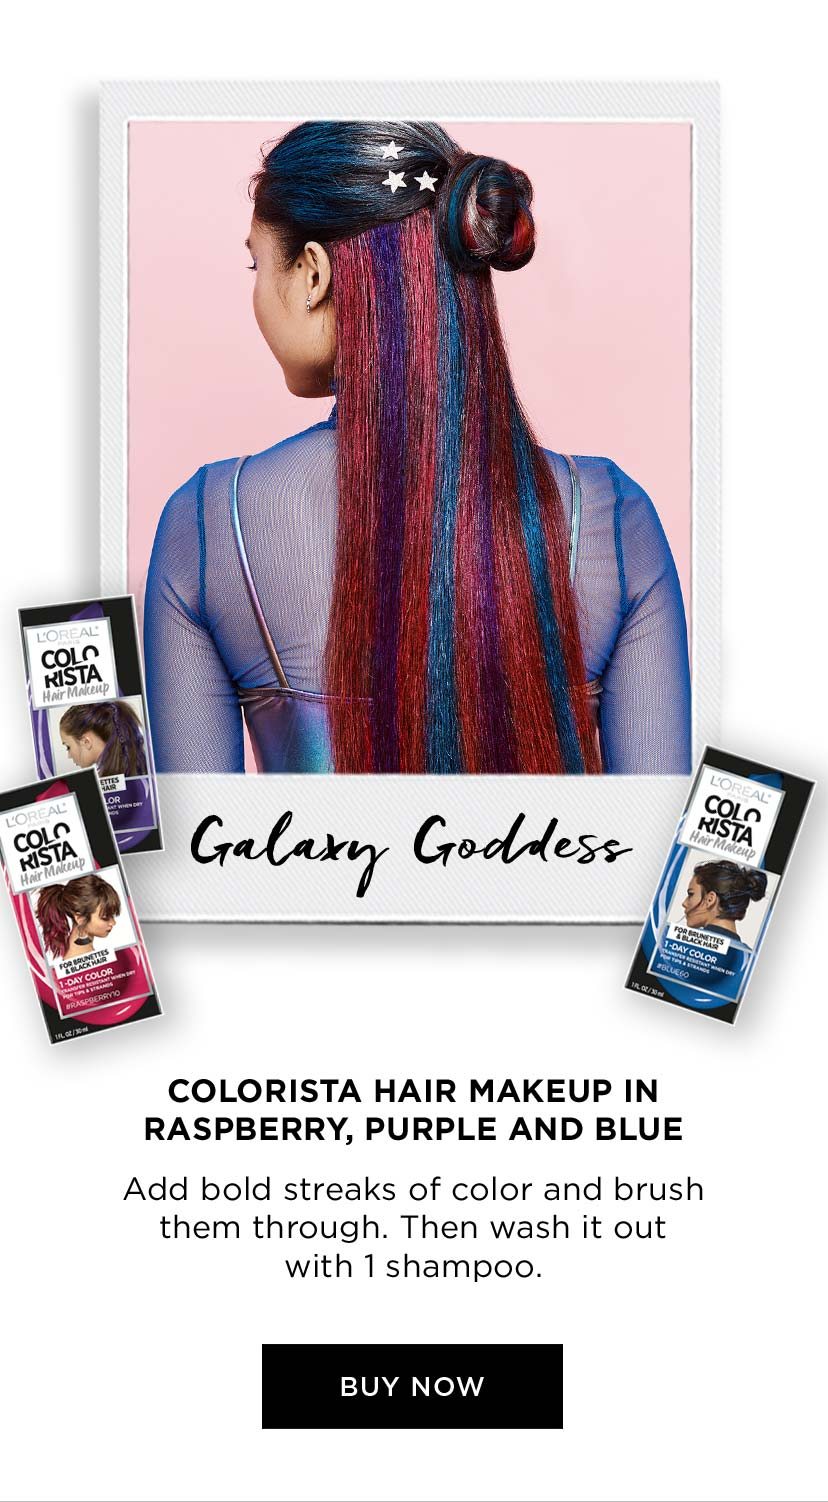 Galaxy Goddess - COLORISTA HAIR MAKEUP IN RASPBERRY, PURPLE AND BLUE - Add bold streaks of color and brush them through. Then wash it out with 1 shampoo. - BUY NOW